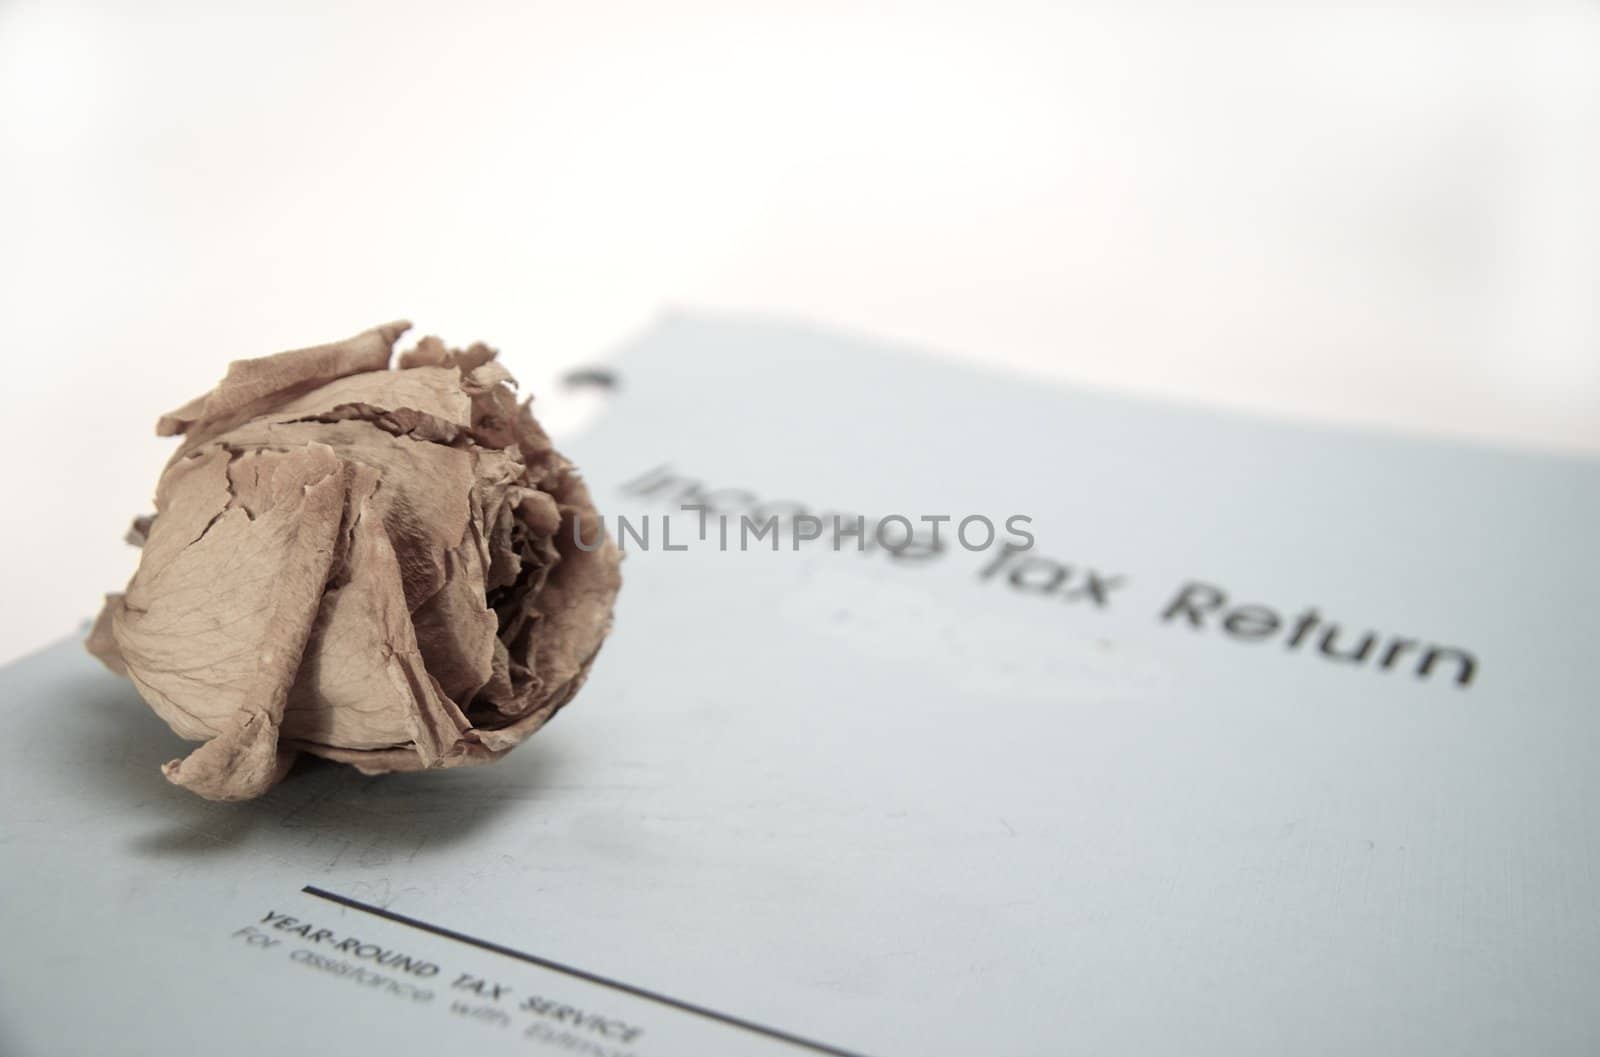 A decaying rose sits on an income tax return, symbolising the saying "as certain as death and taxes"